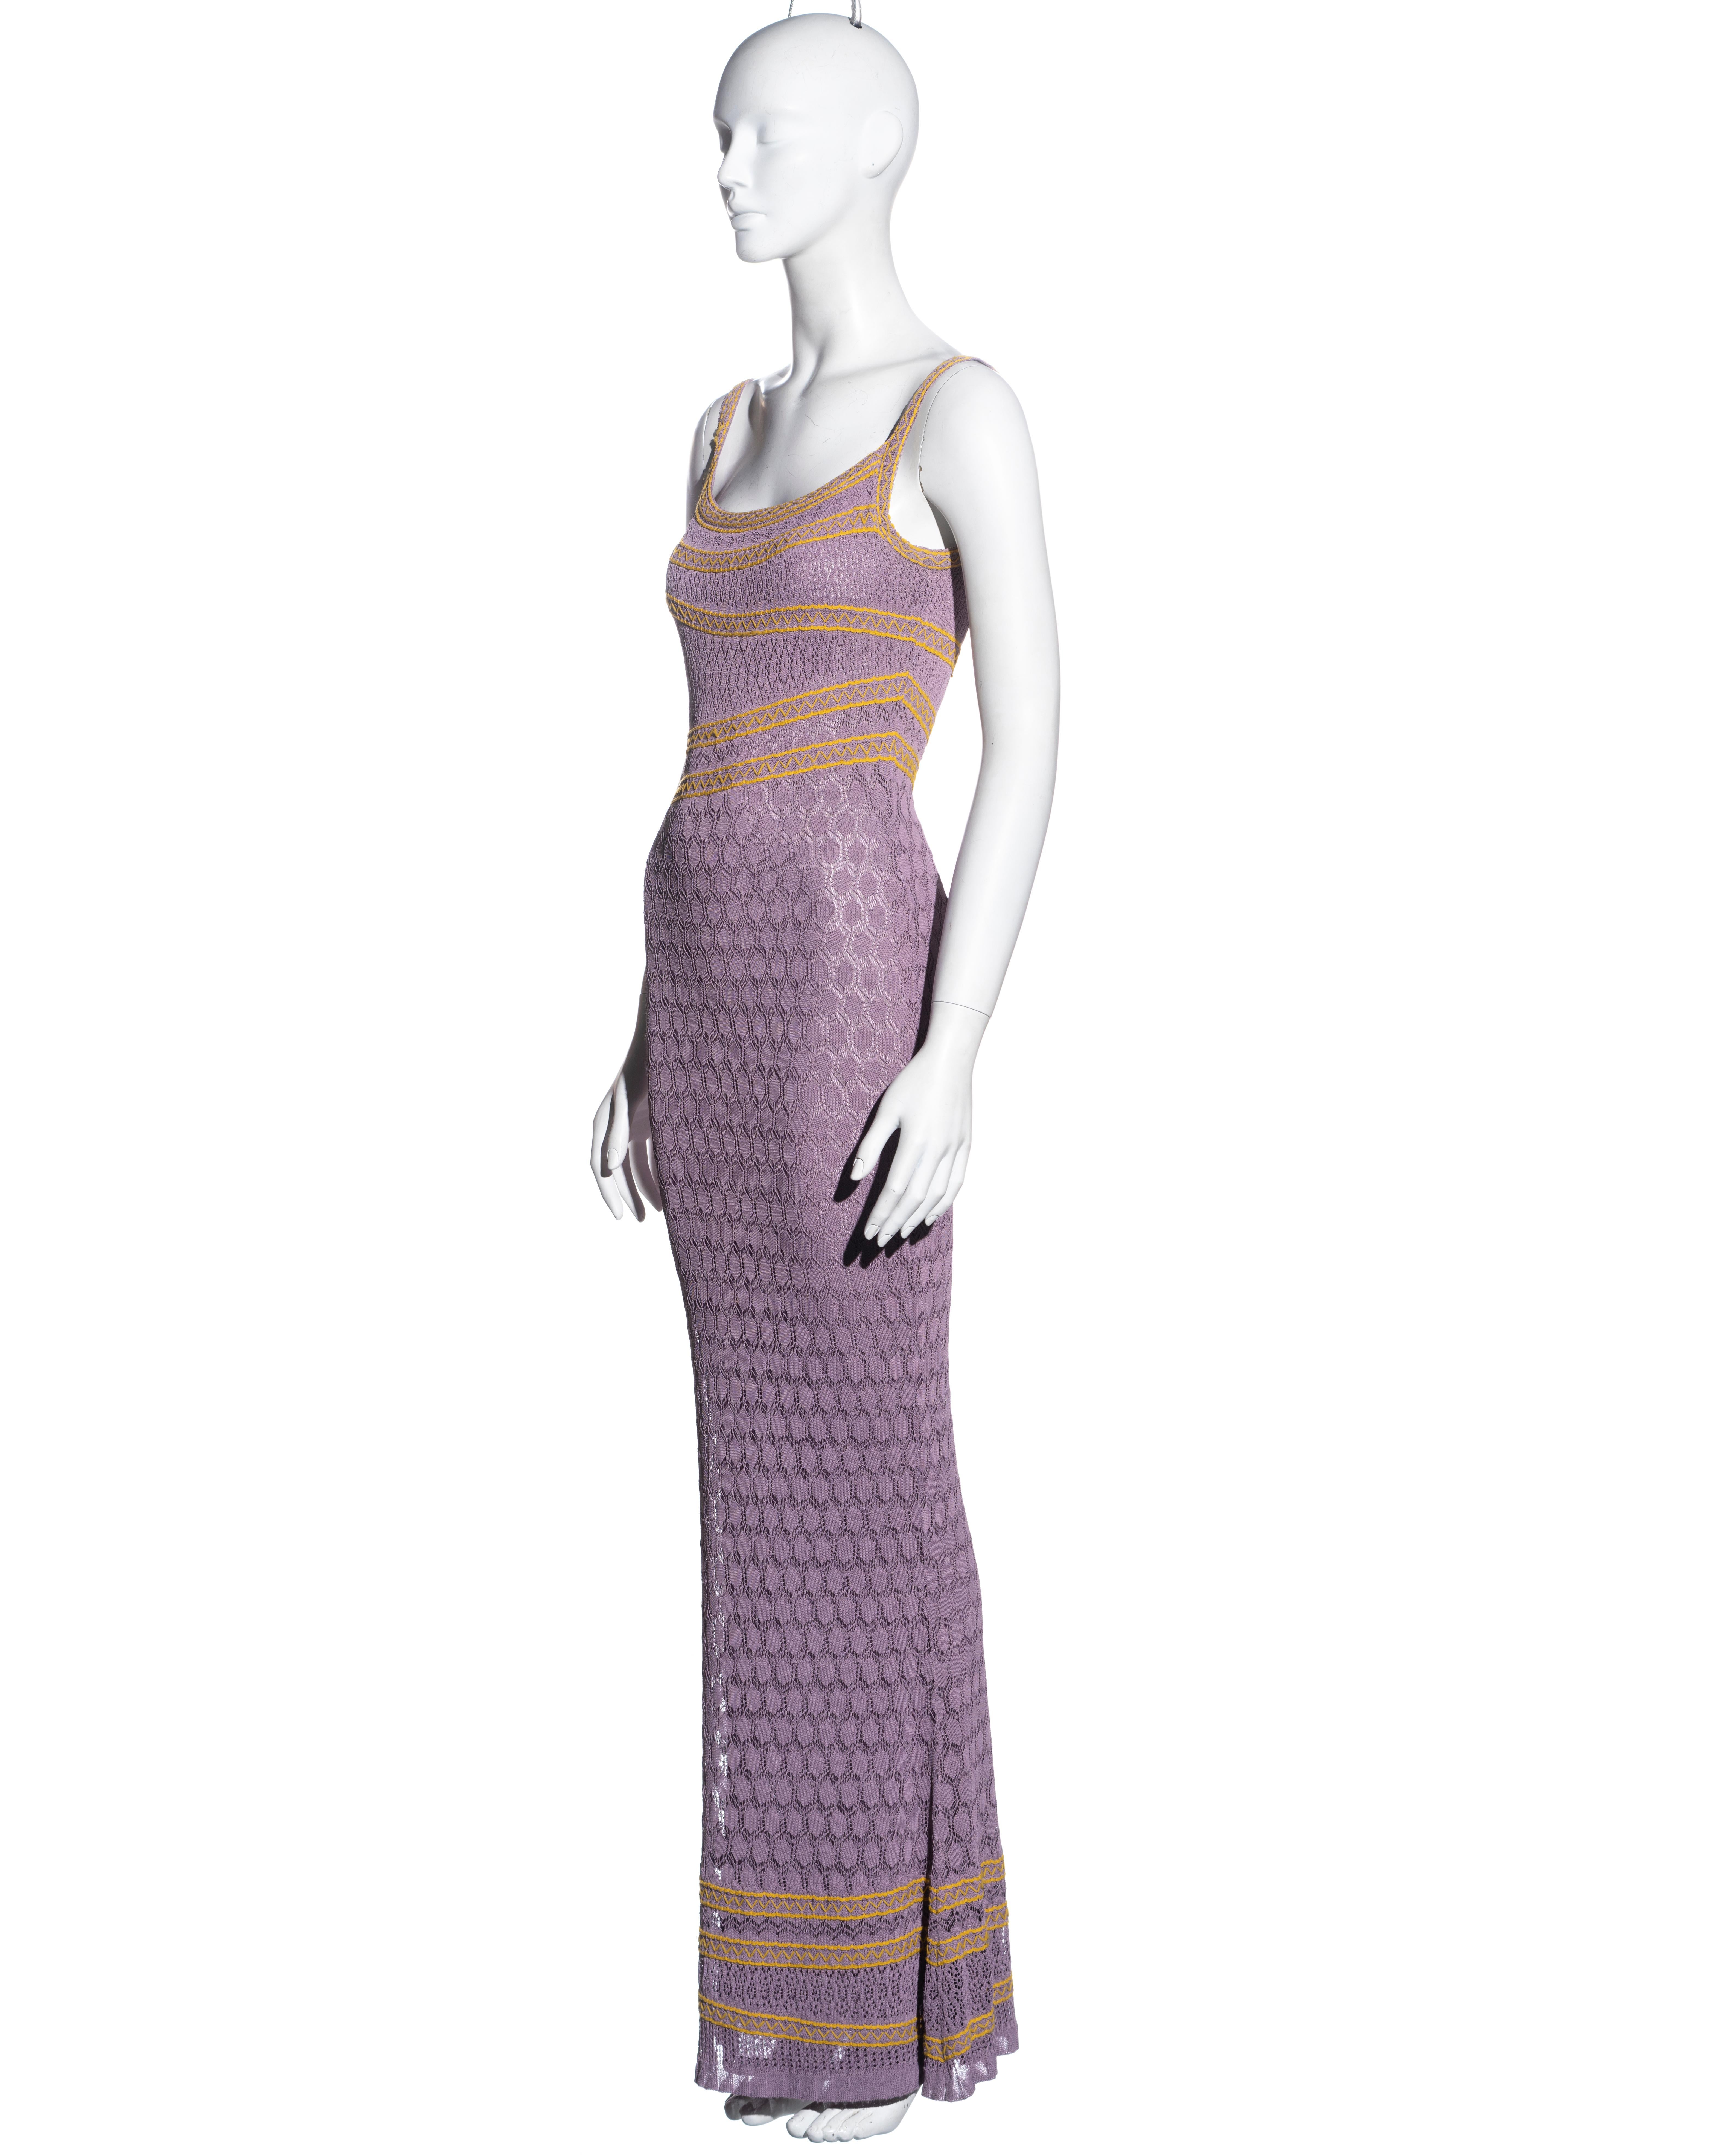 Women's Christian Dior by John Galliano lavender crochet lace maxi dress, ss 2000 For Sale